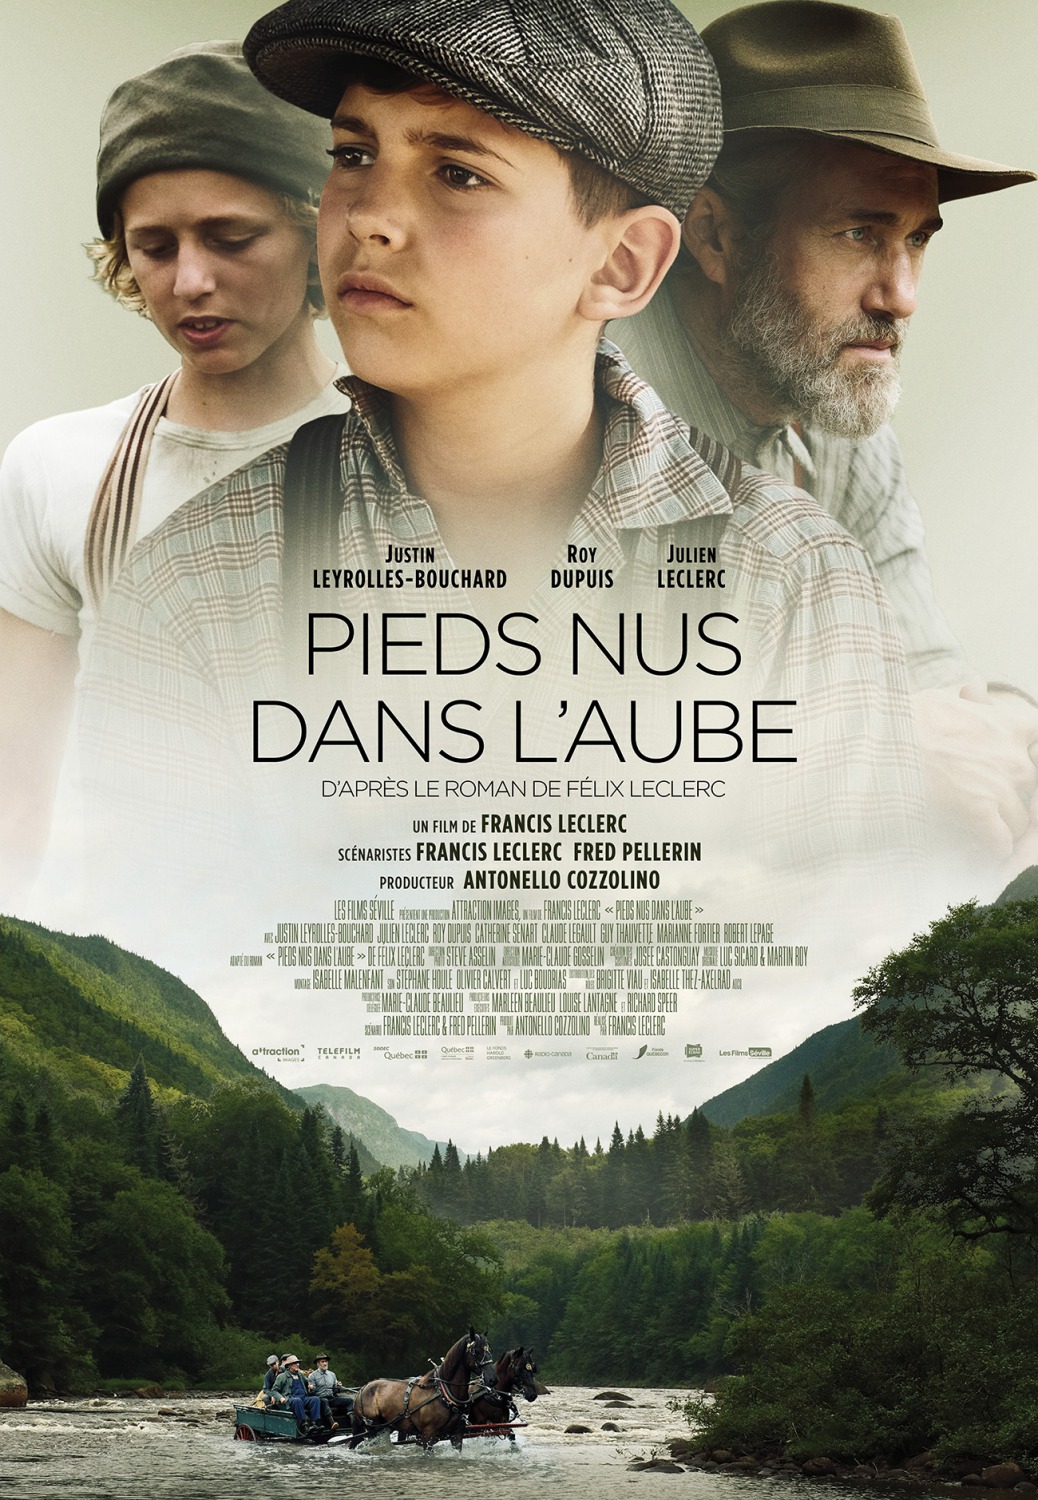 Extra Large Movie Poster Image for Pieds nus dans l'aube (#4 of 4)